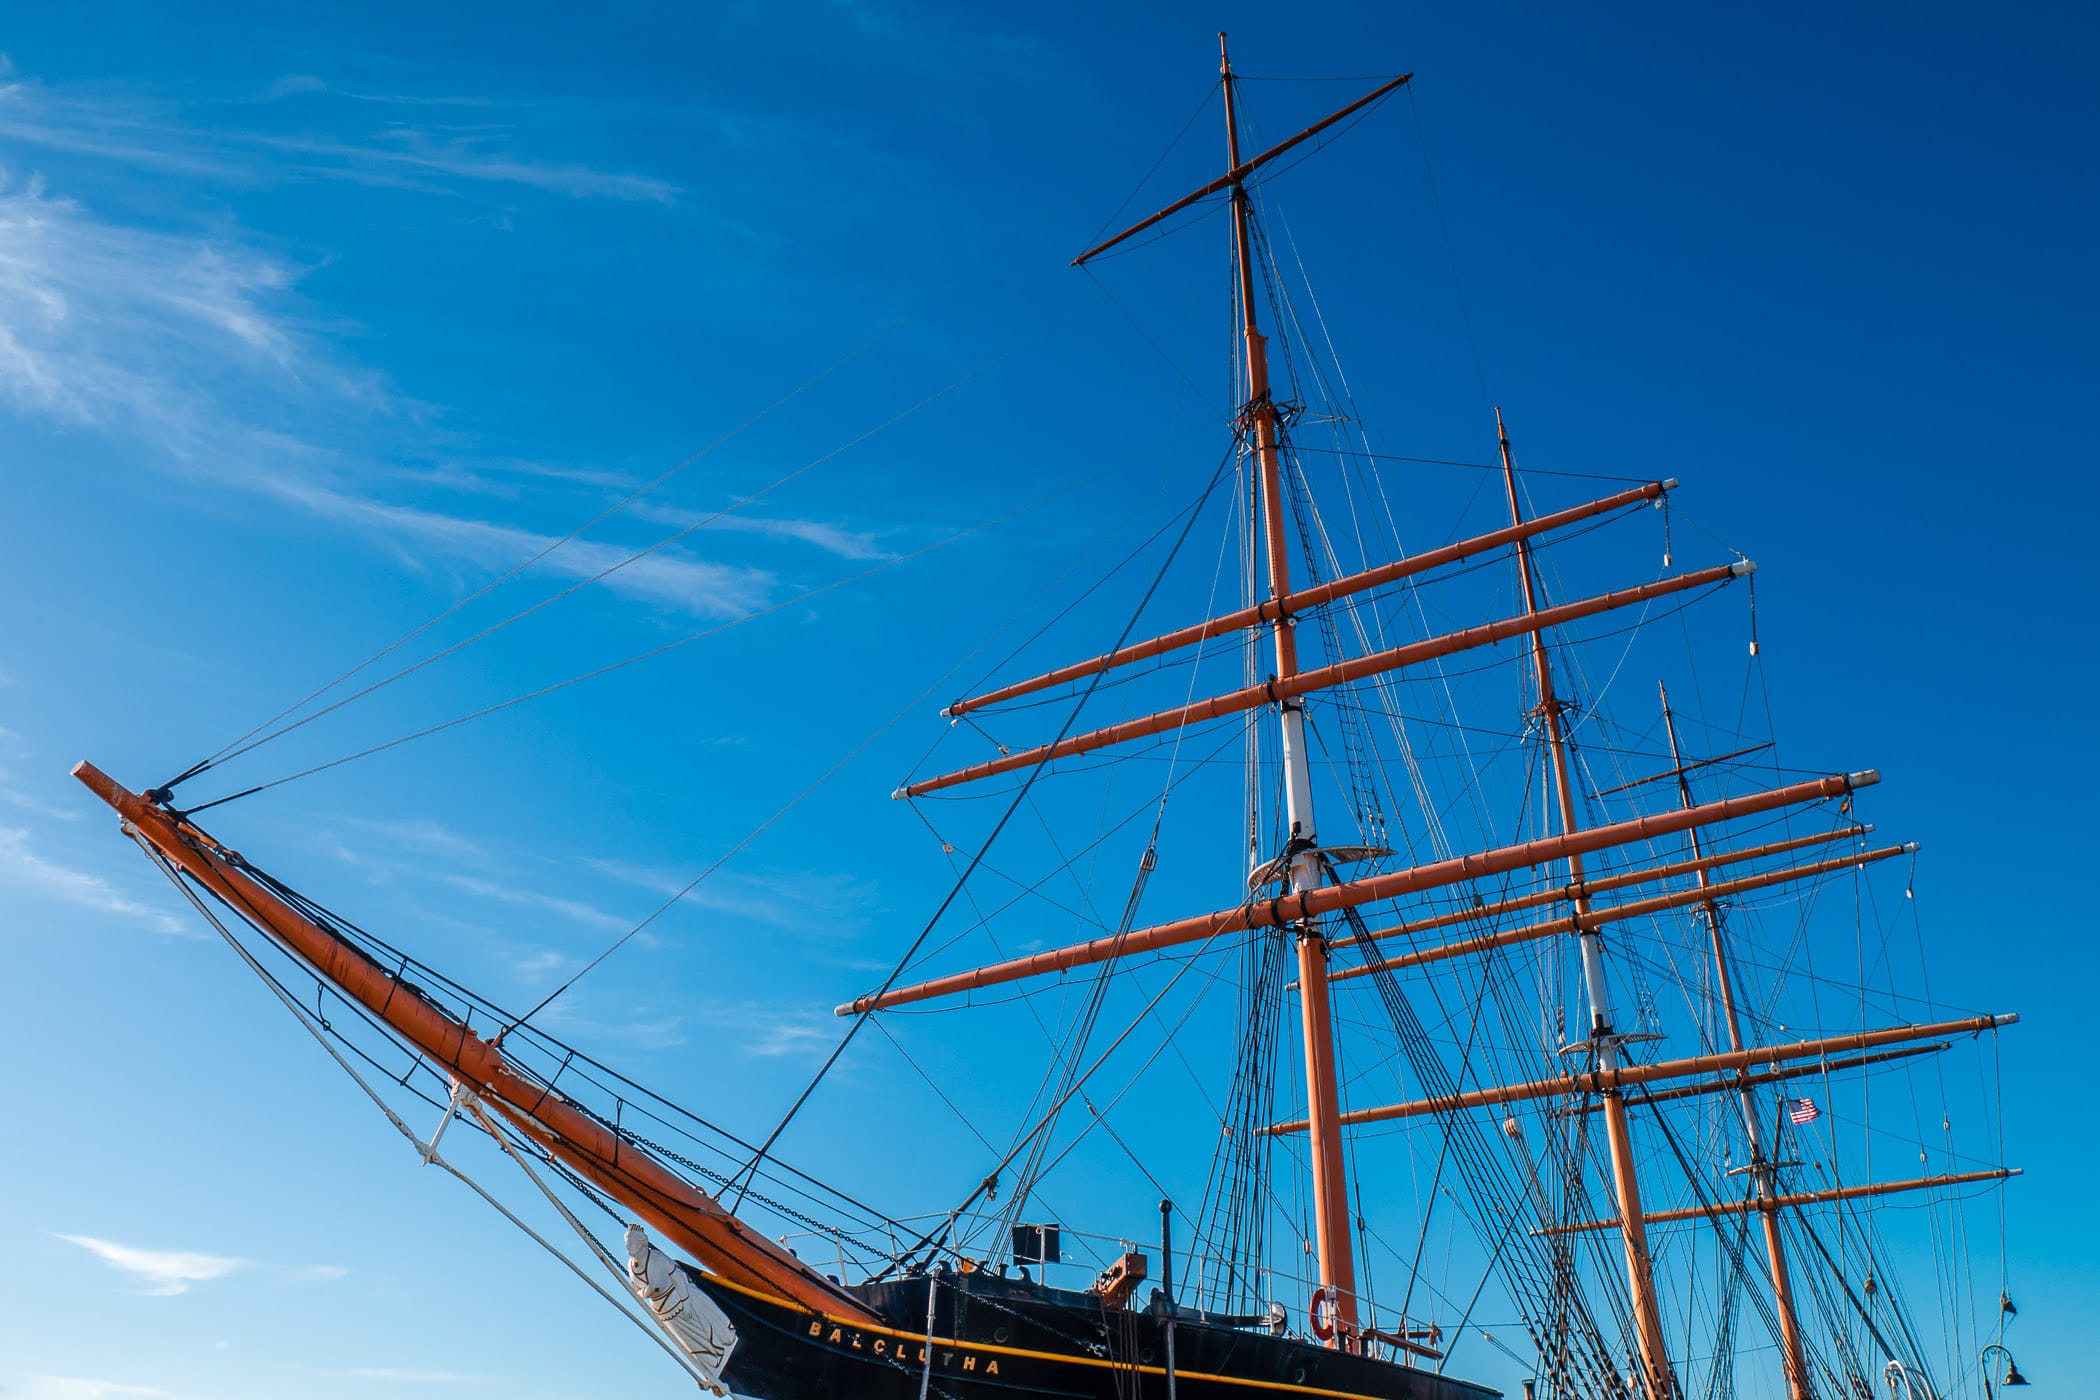 The masts of the Balclutha, a full-rigged ship built in 1886, rise into the blue Bay Area sky at the San Francisco Maritime National Historical Park.